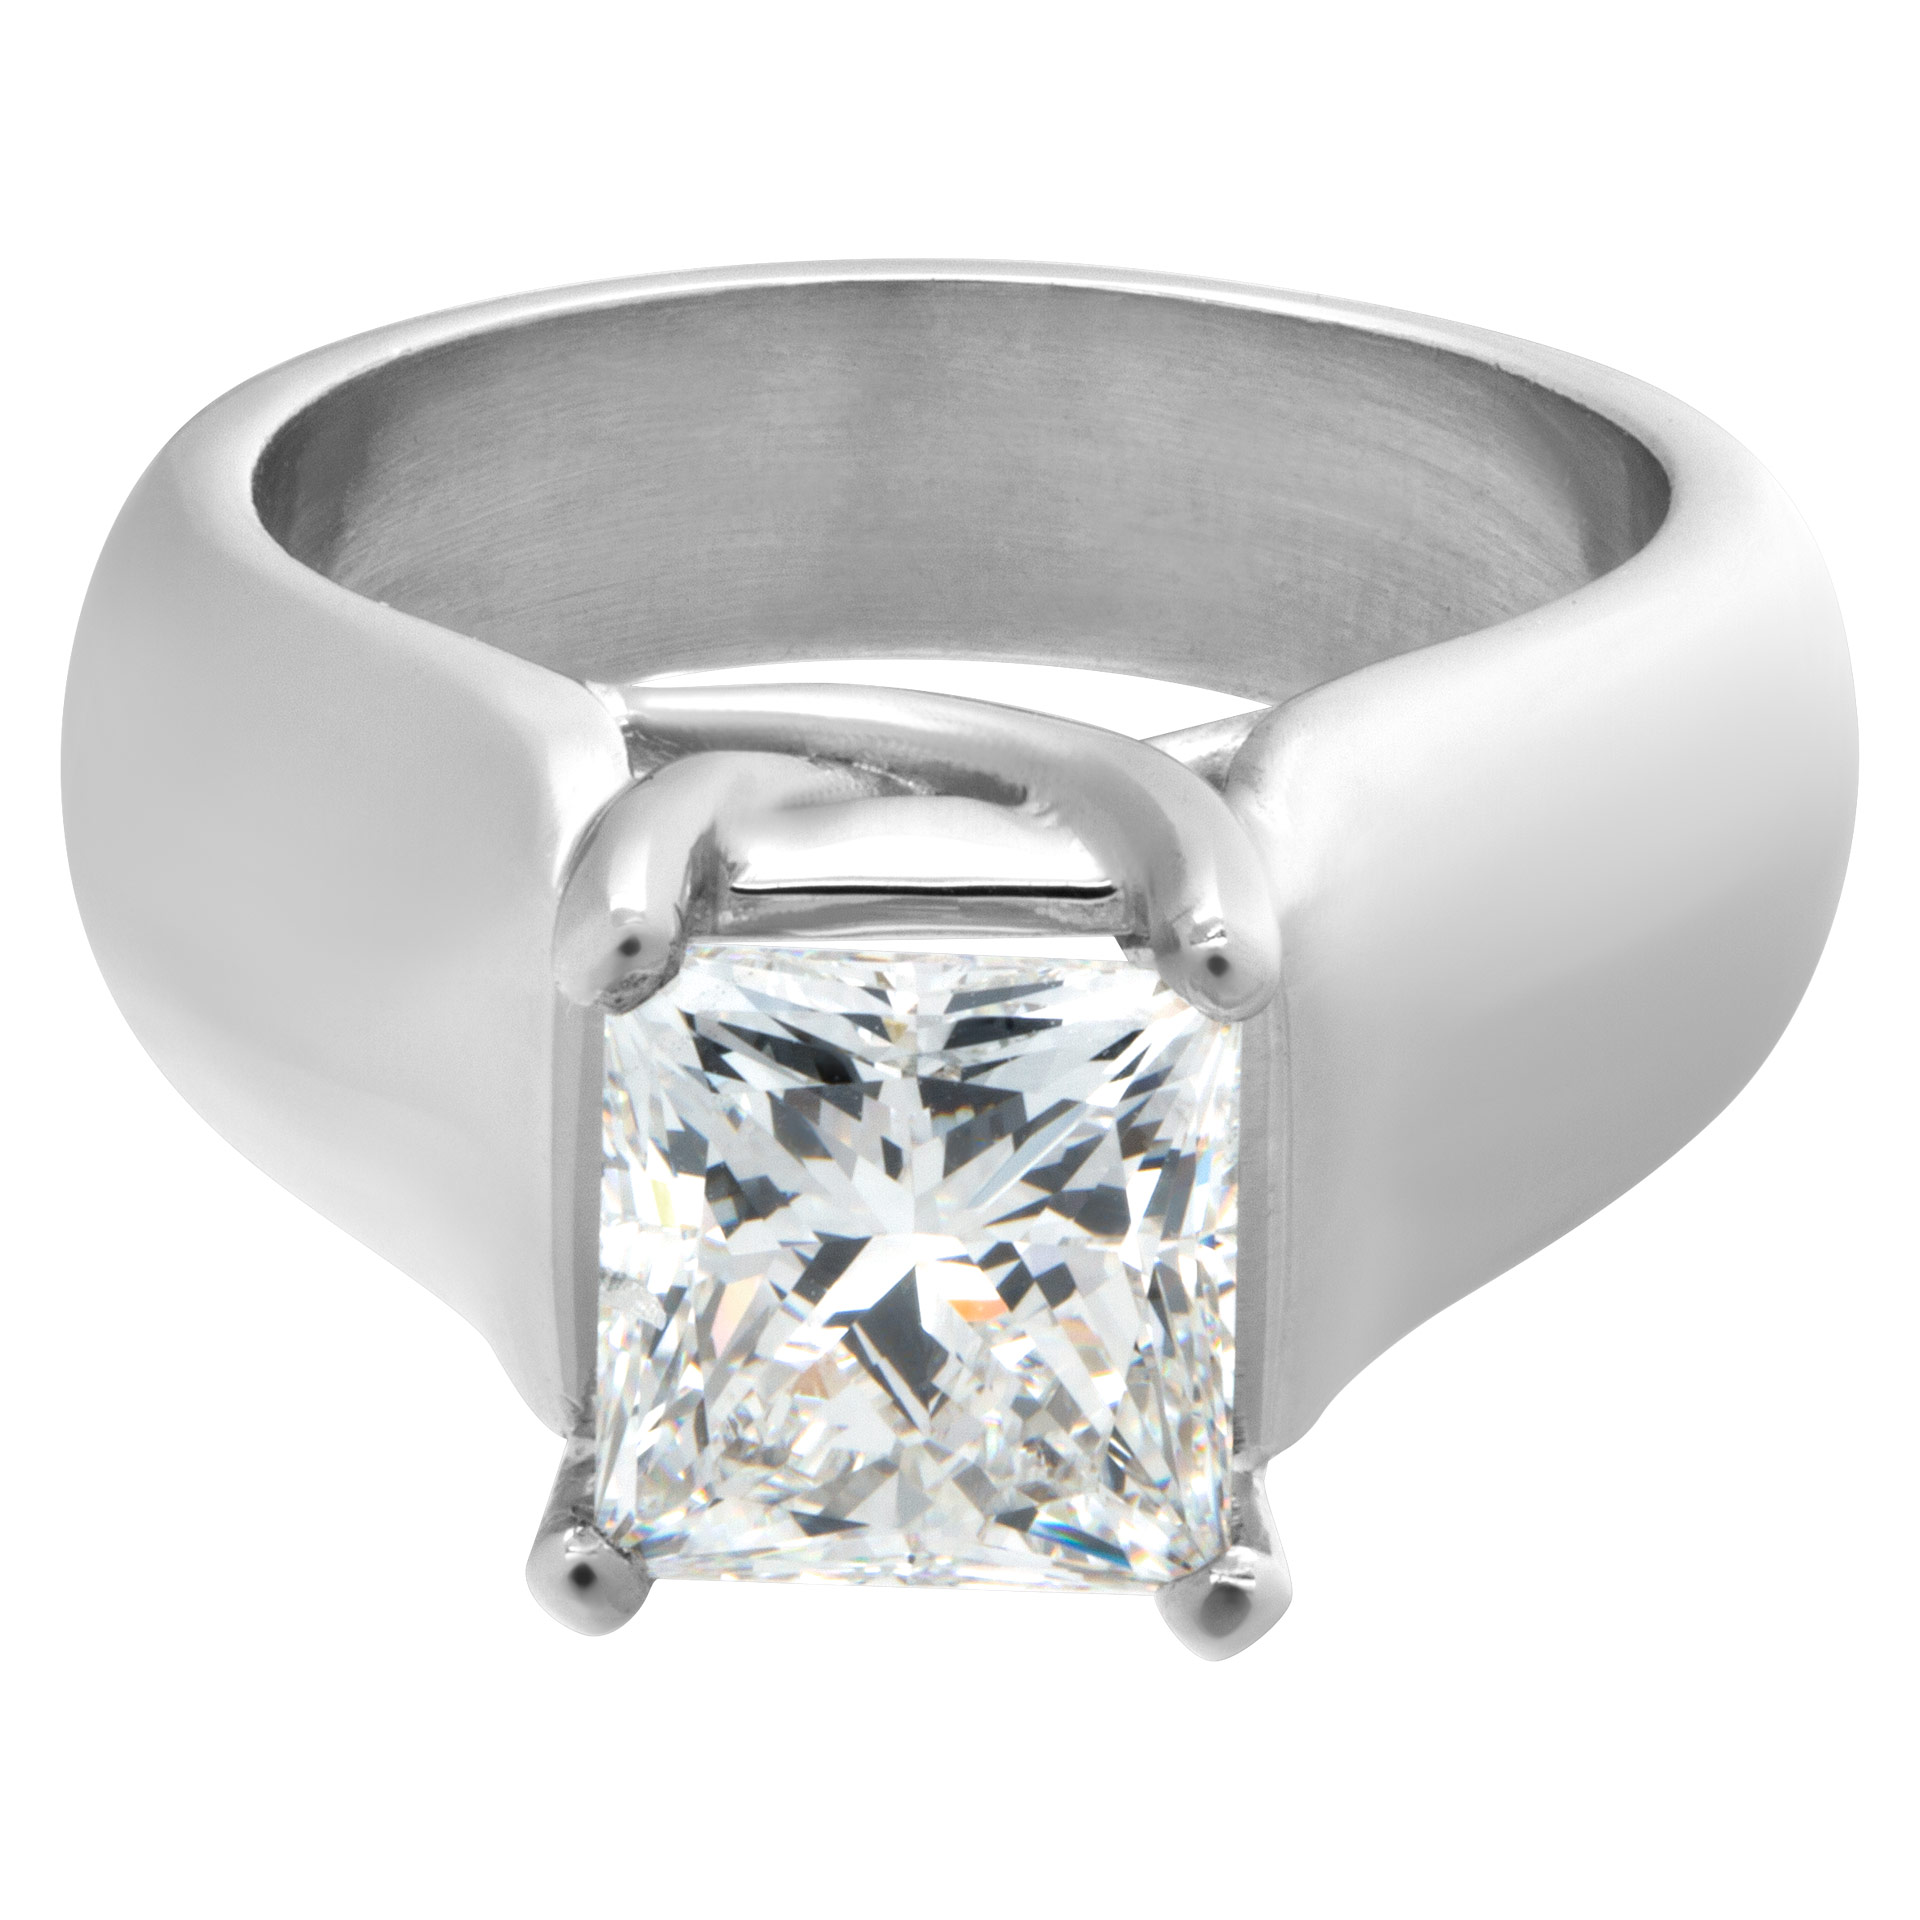 GIA certified rectangular modified brilliant cut diamond 2.66 carat (G Color SI2 Clarity) ring image 1